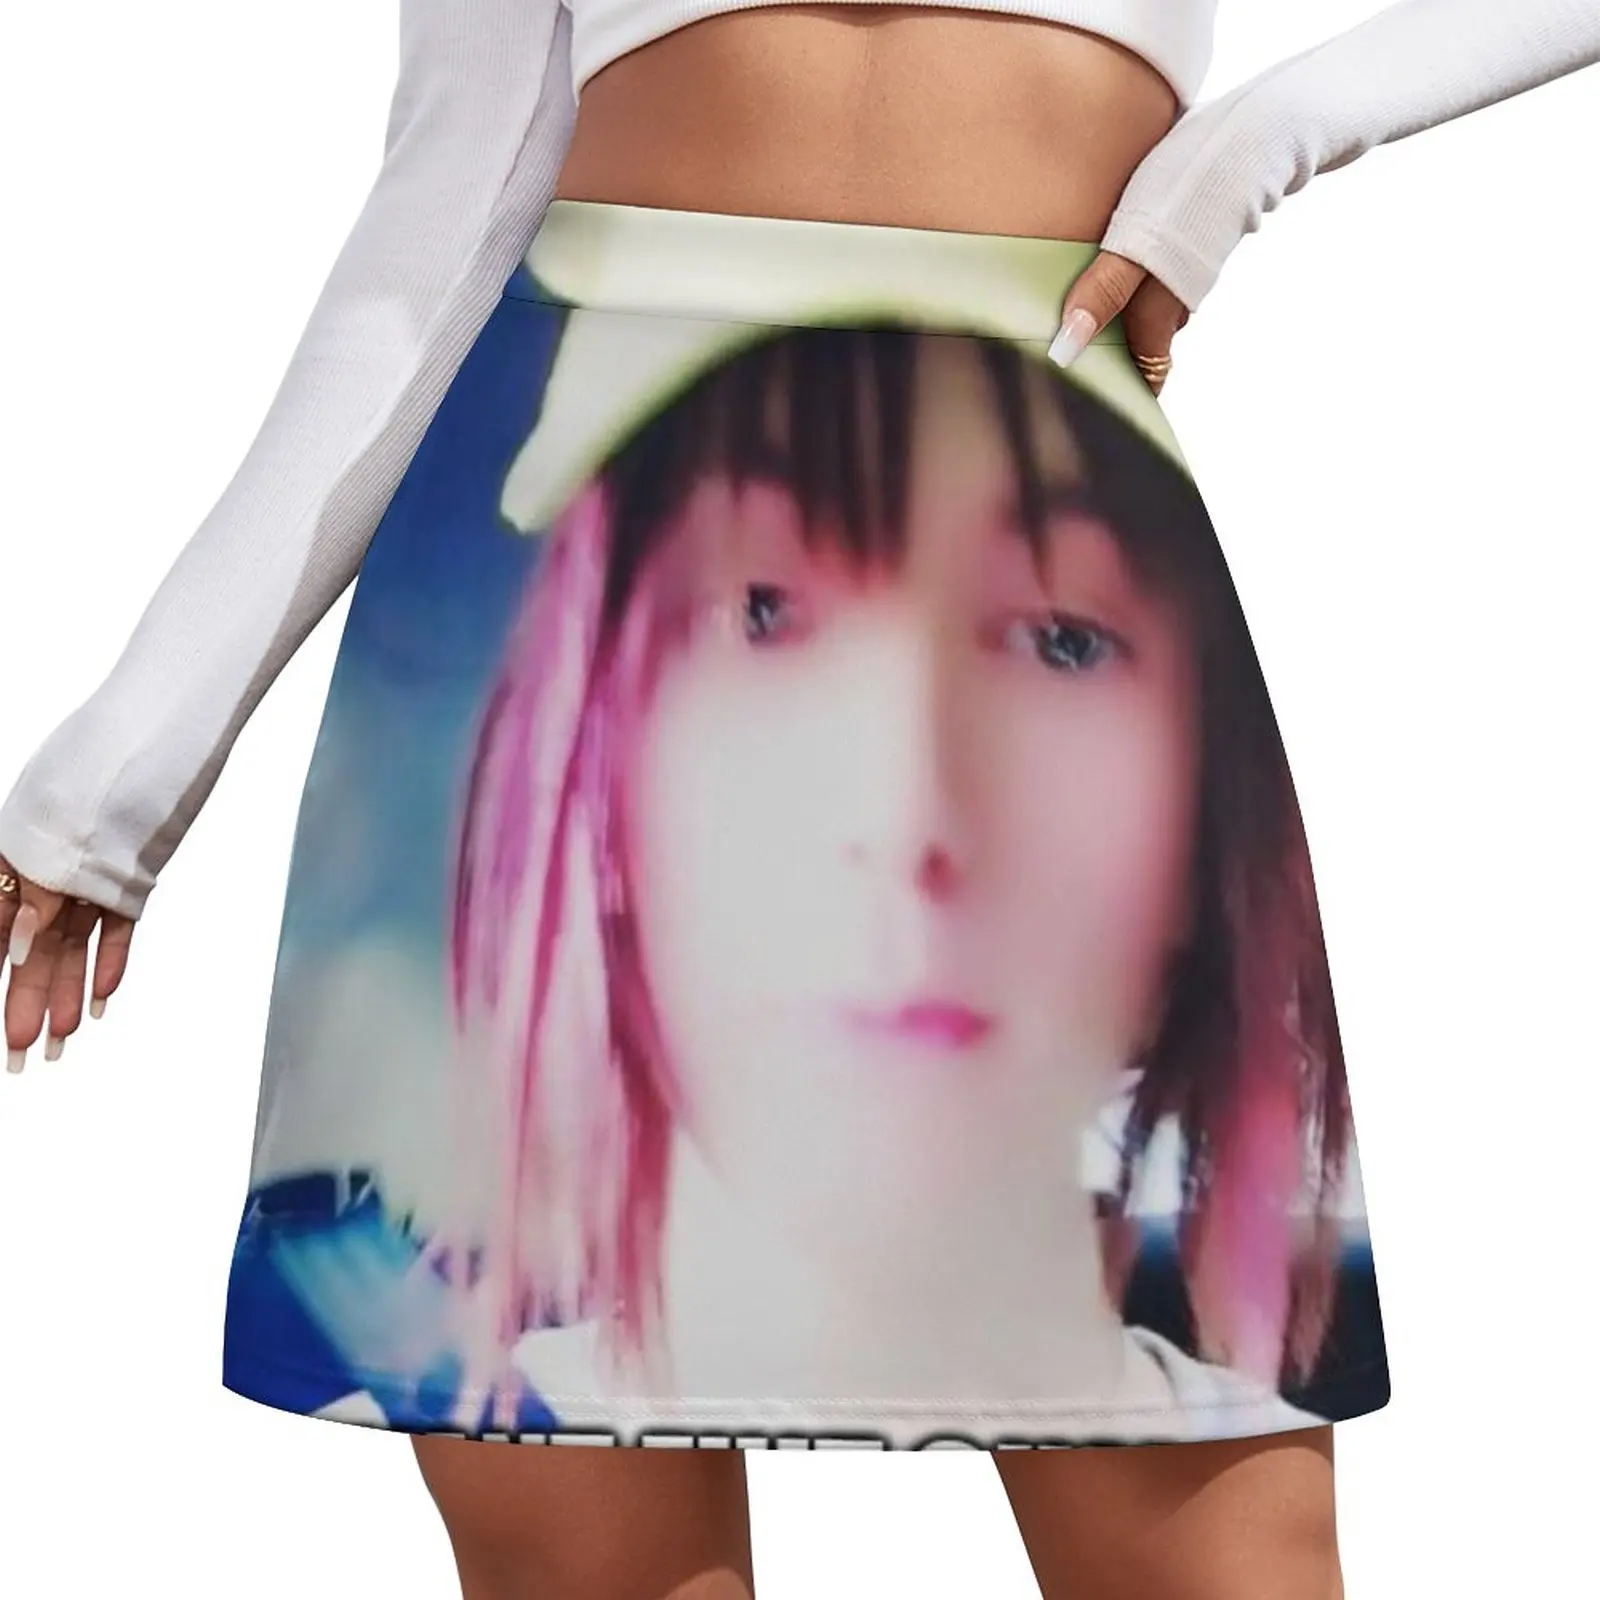 Drain Gang Bladee I want Fuit Gummy Meme Shirt Mini Skirt skirts for women 2023 women's clothing korea stylish spanky and our gang anything you choose without rhyme or reason lp